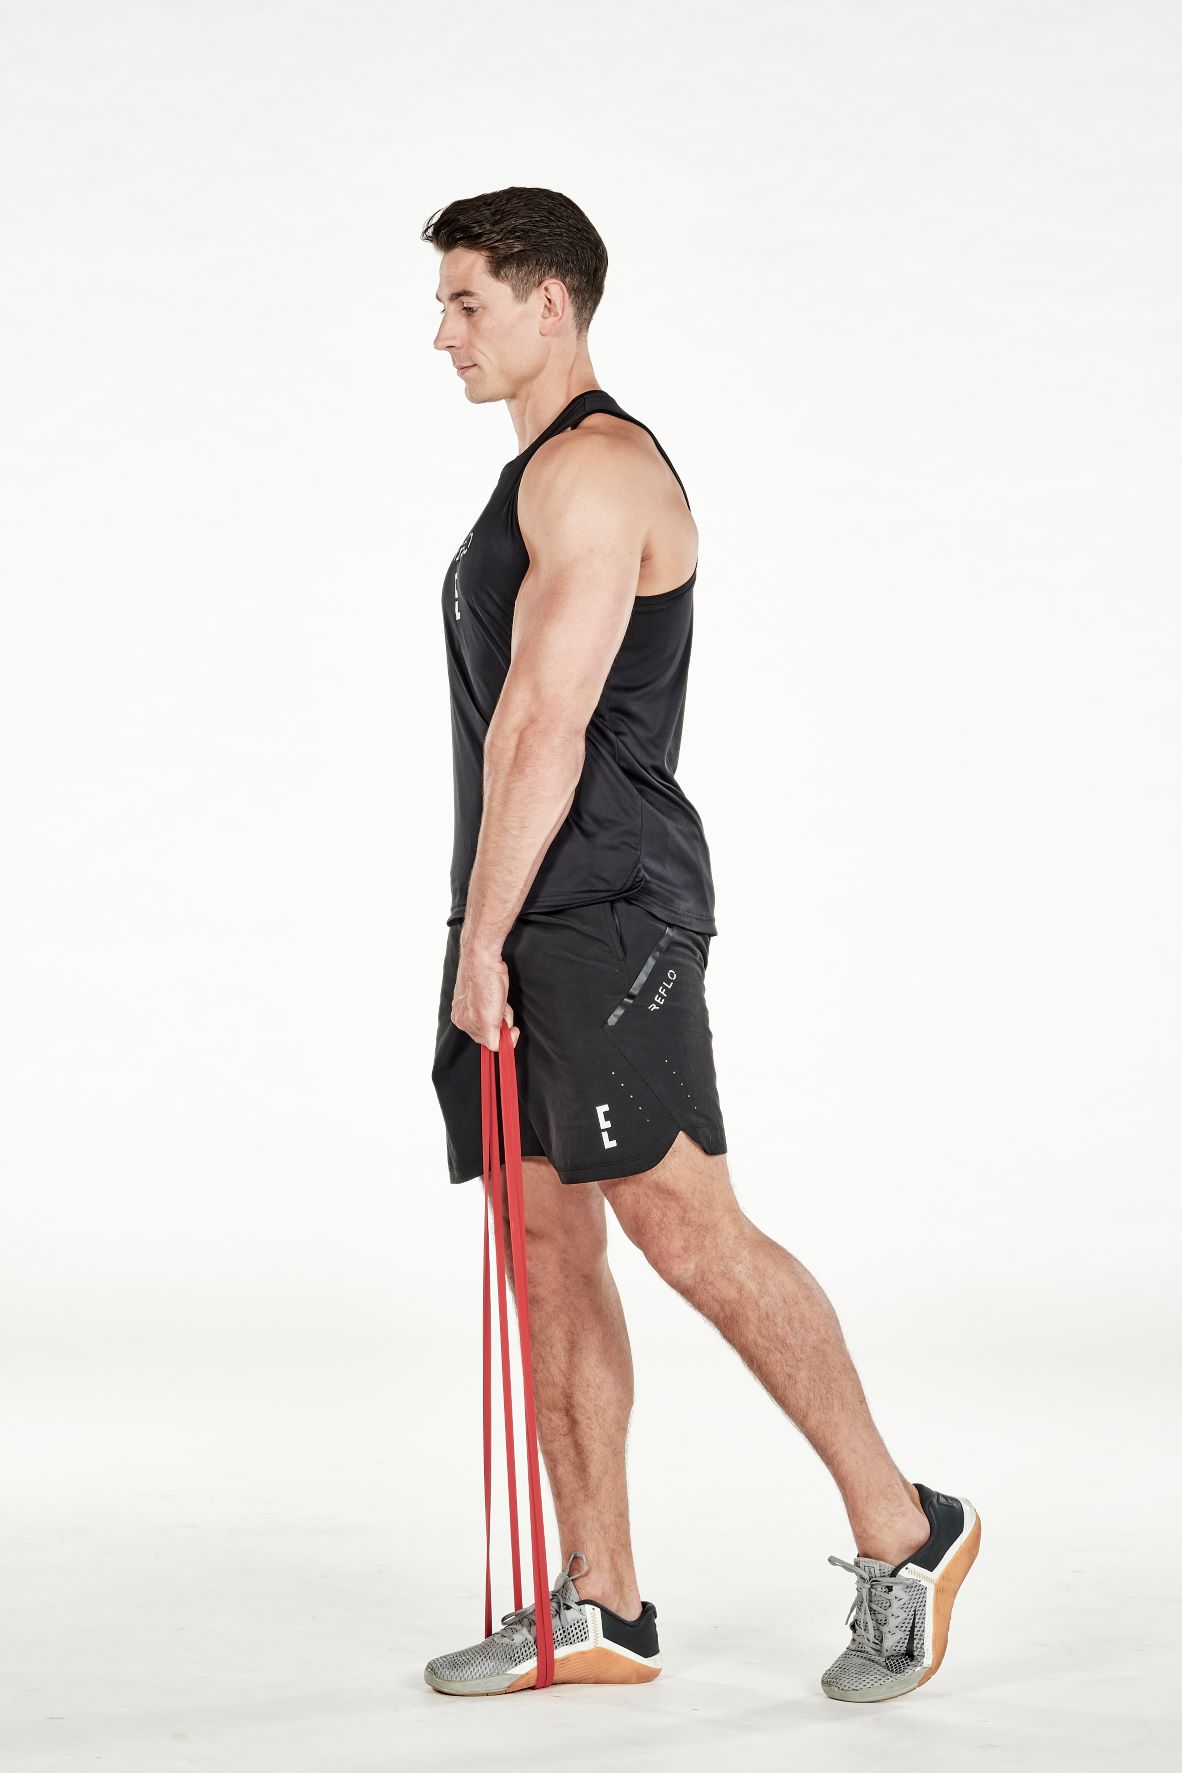 man demonstrating step two of resistance band single-leg romanian deadlift; he stands straight, holding a resistance band which is being held under his foot; his other leg is relaxed and positioned behind him; he wears a black fitness vest, black shorts and trainers